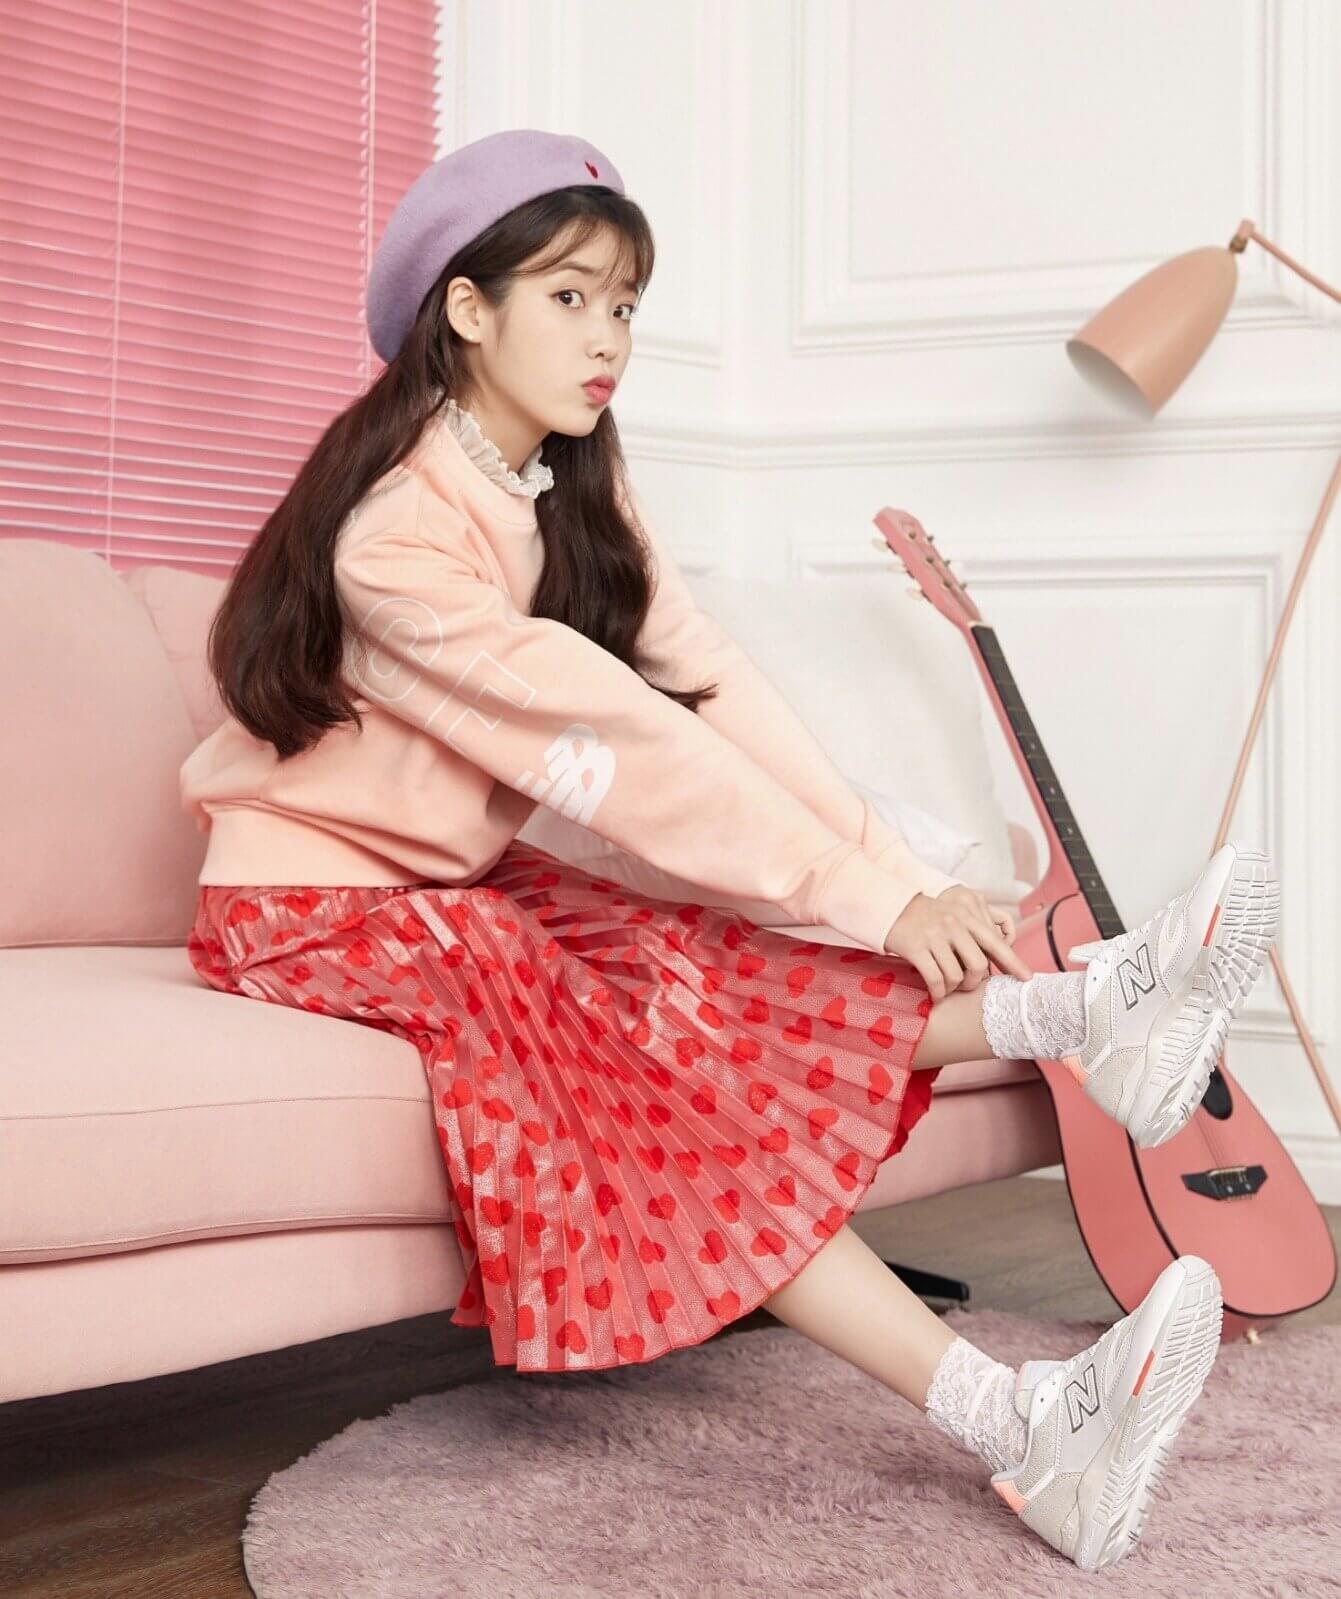 A young girl sitting on a pink couch - New Balance